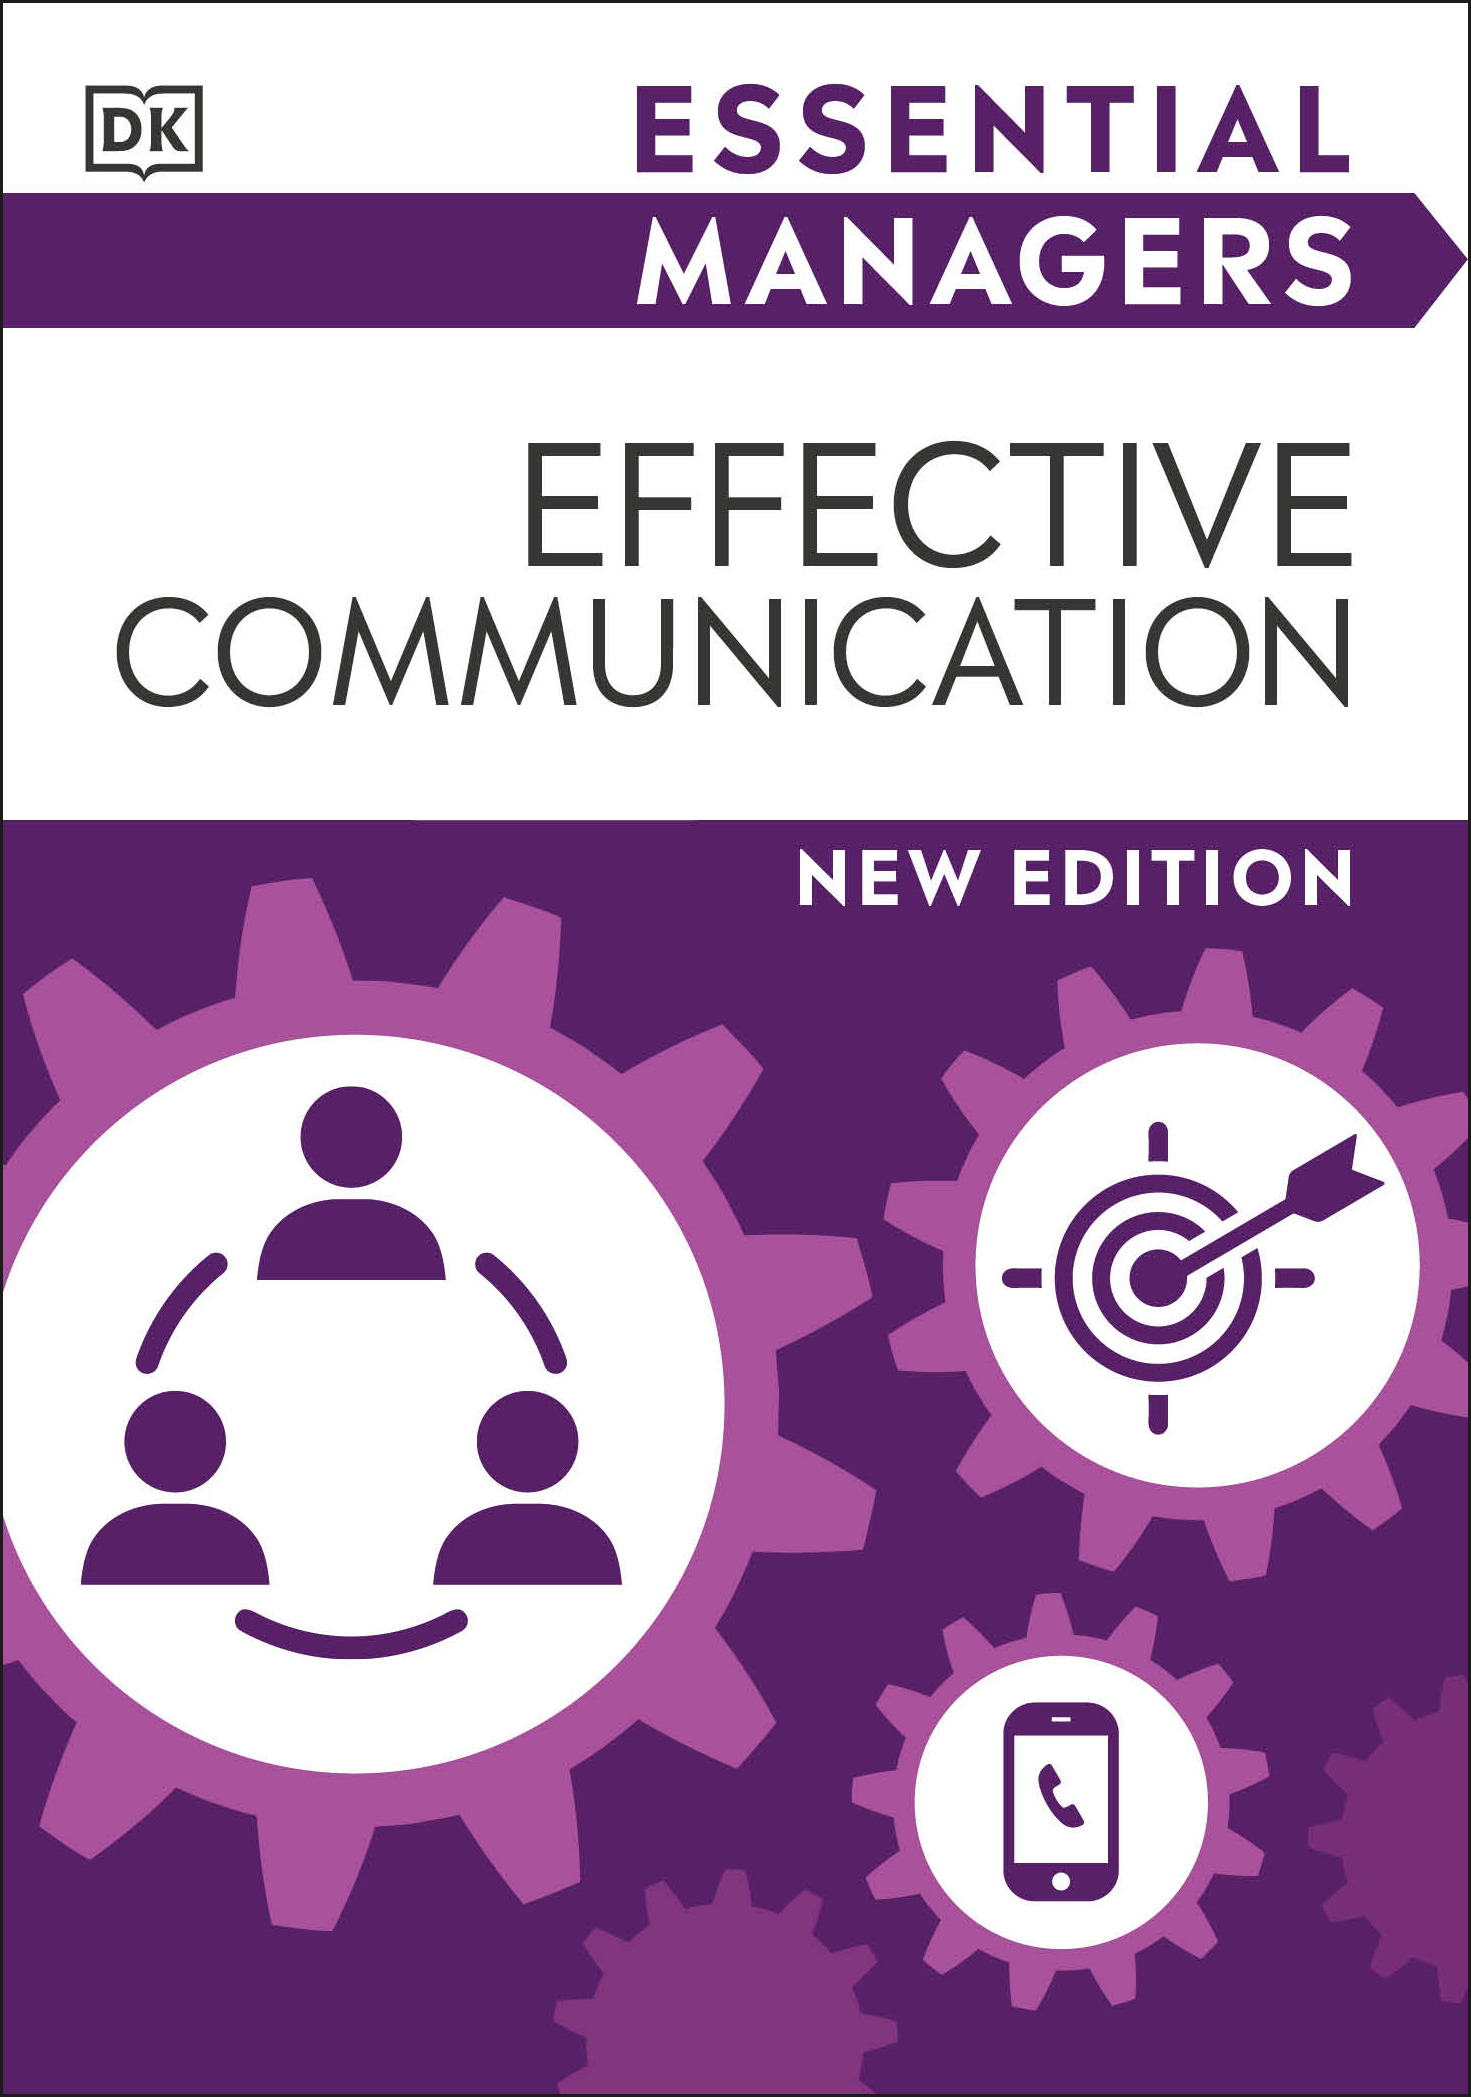 Essential Managers Effective Communication | 